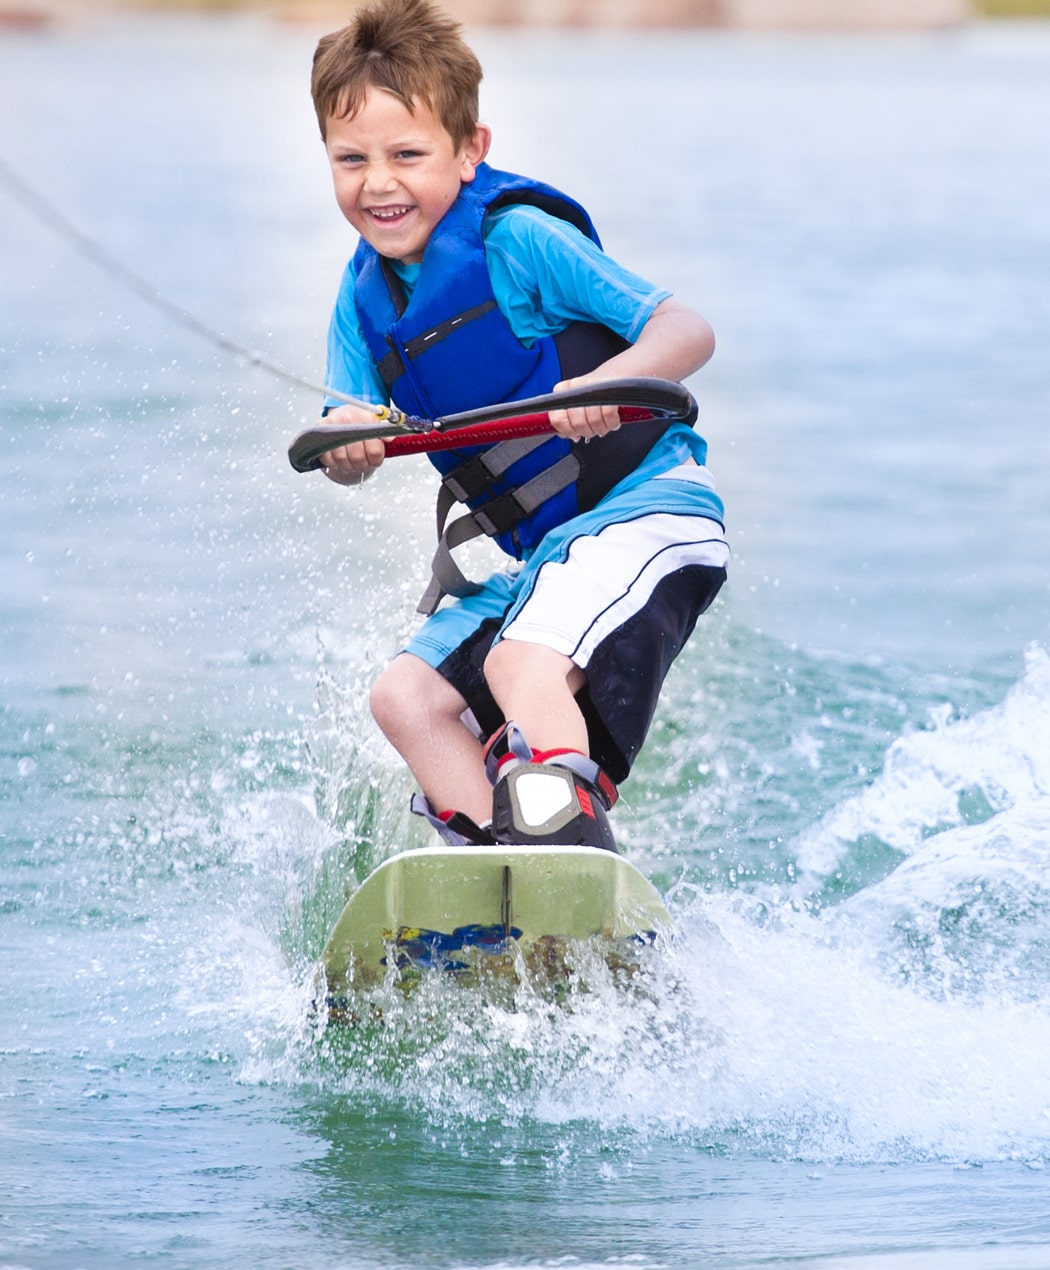 Kid on a wakeboard